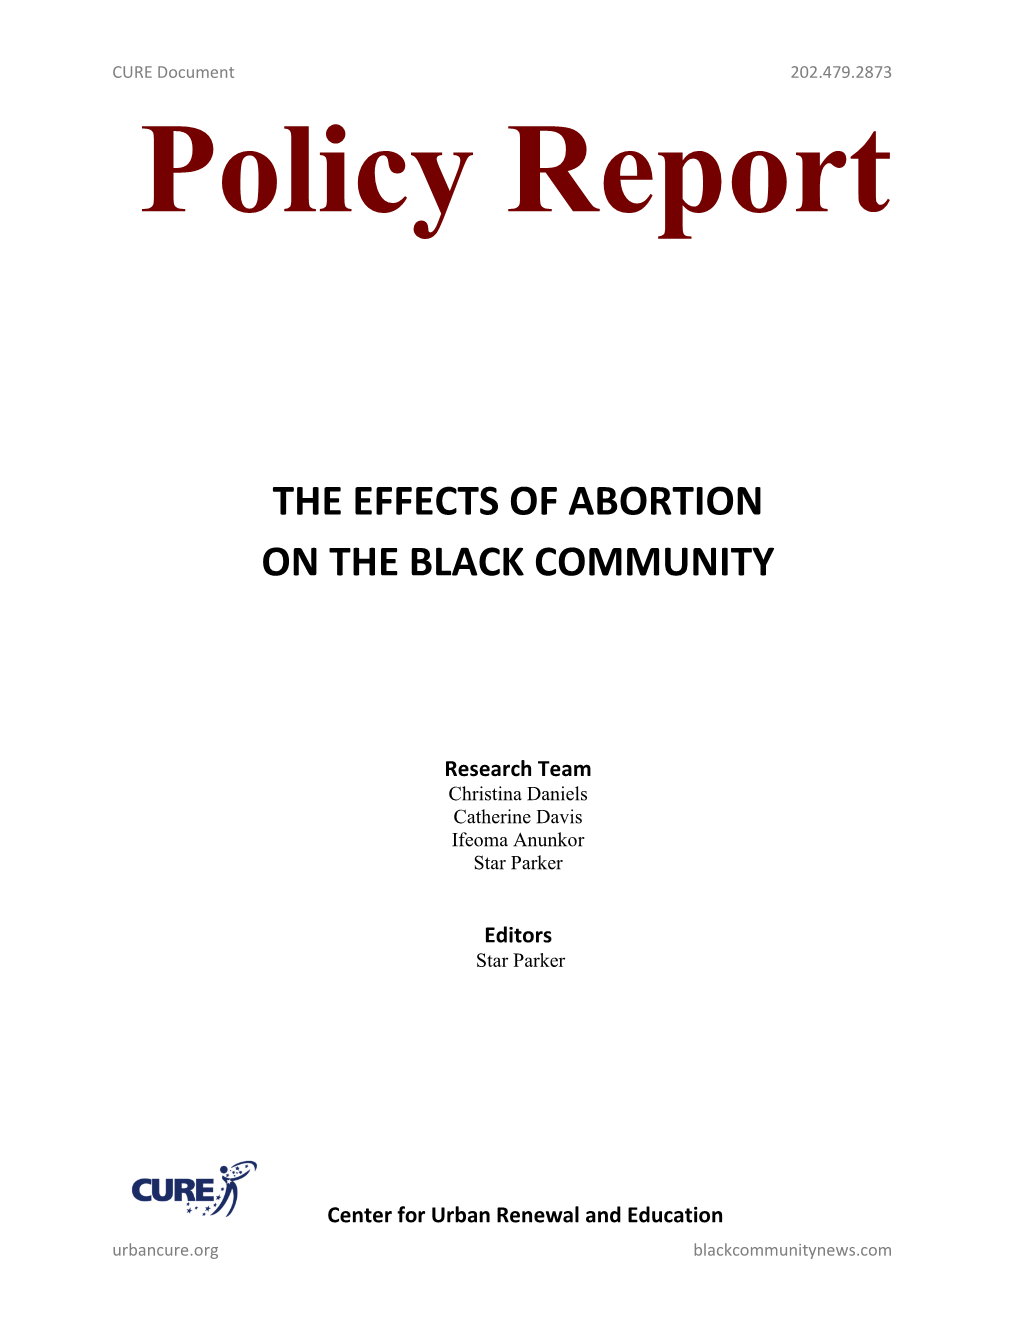 The Effects of Abortion on the Black Community